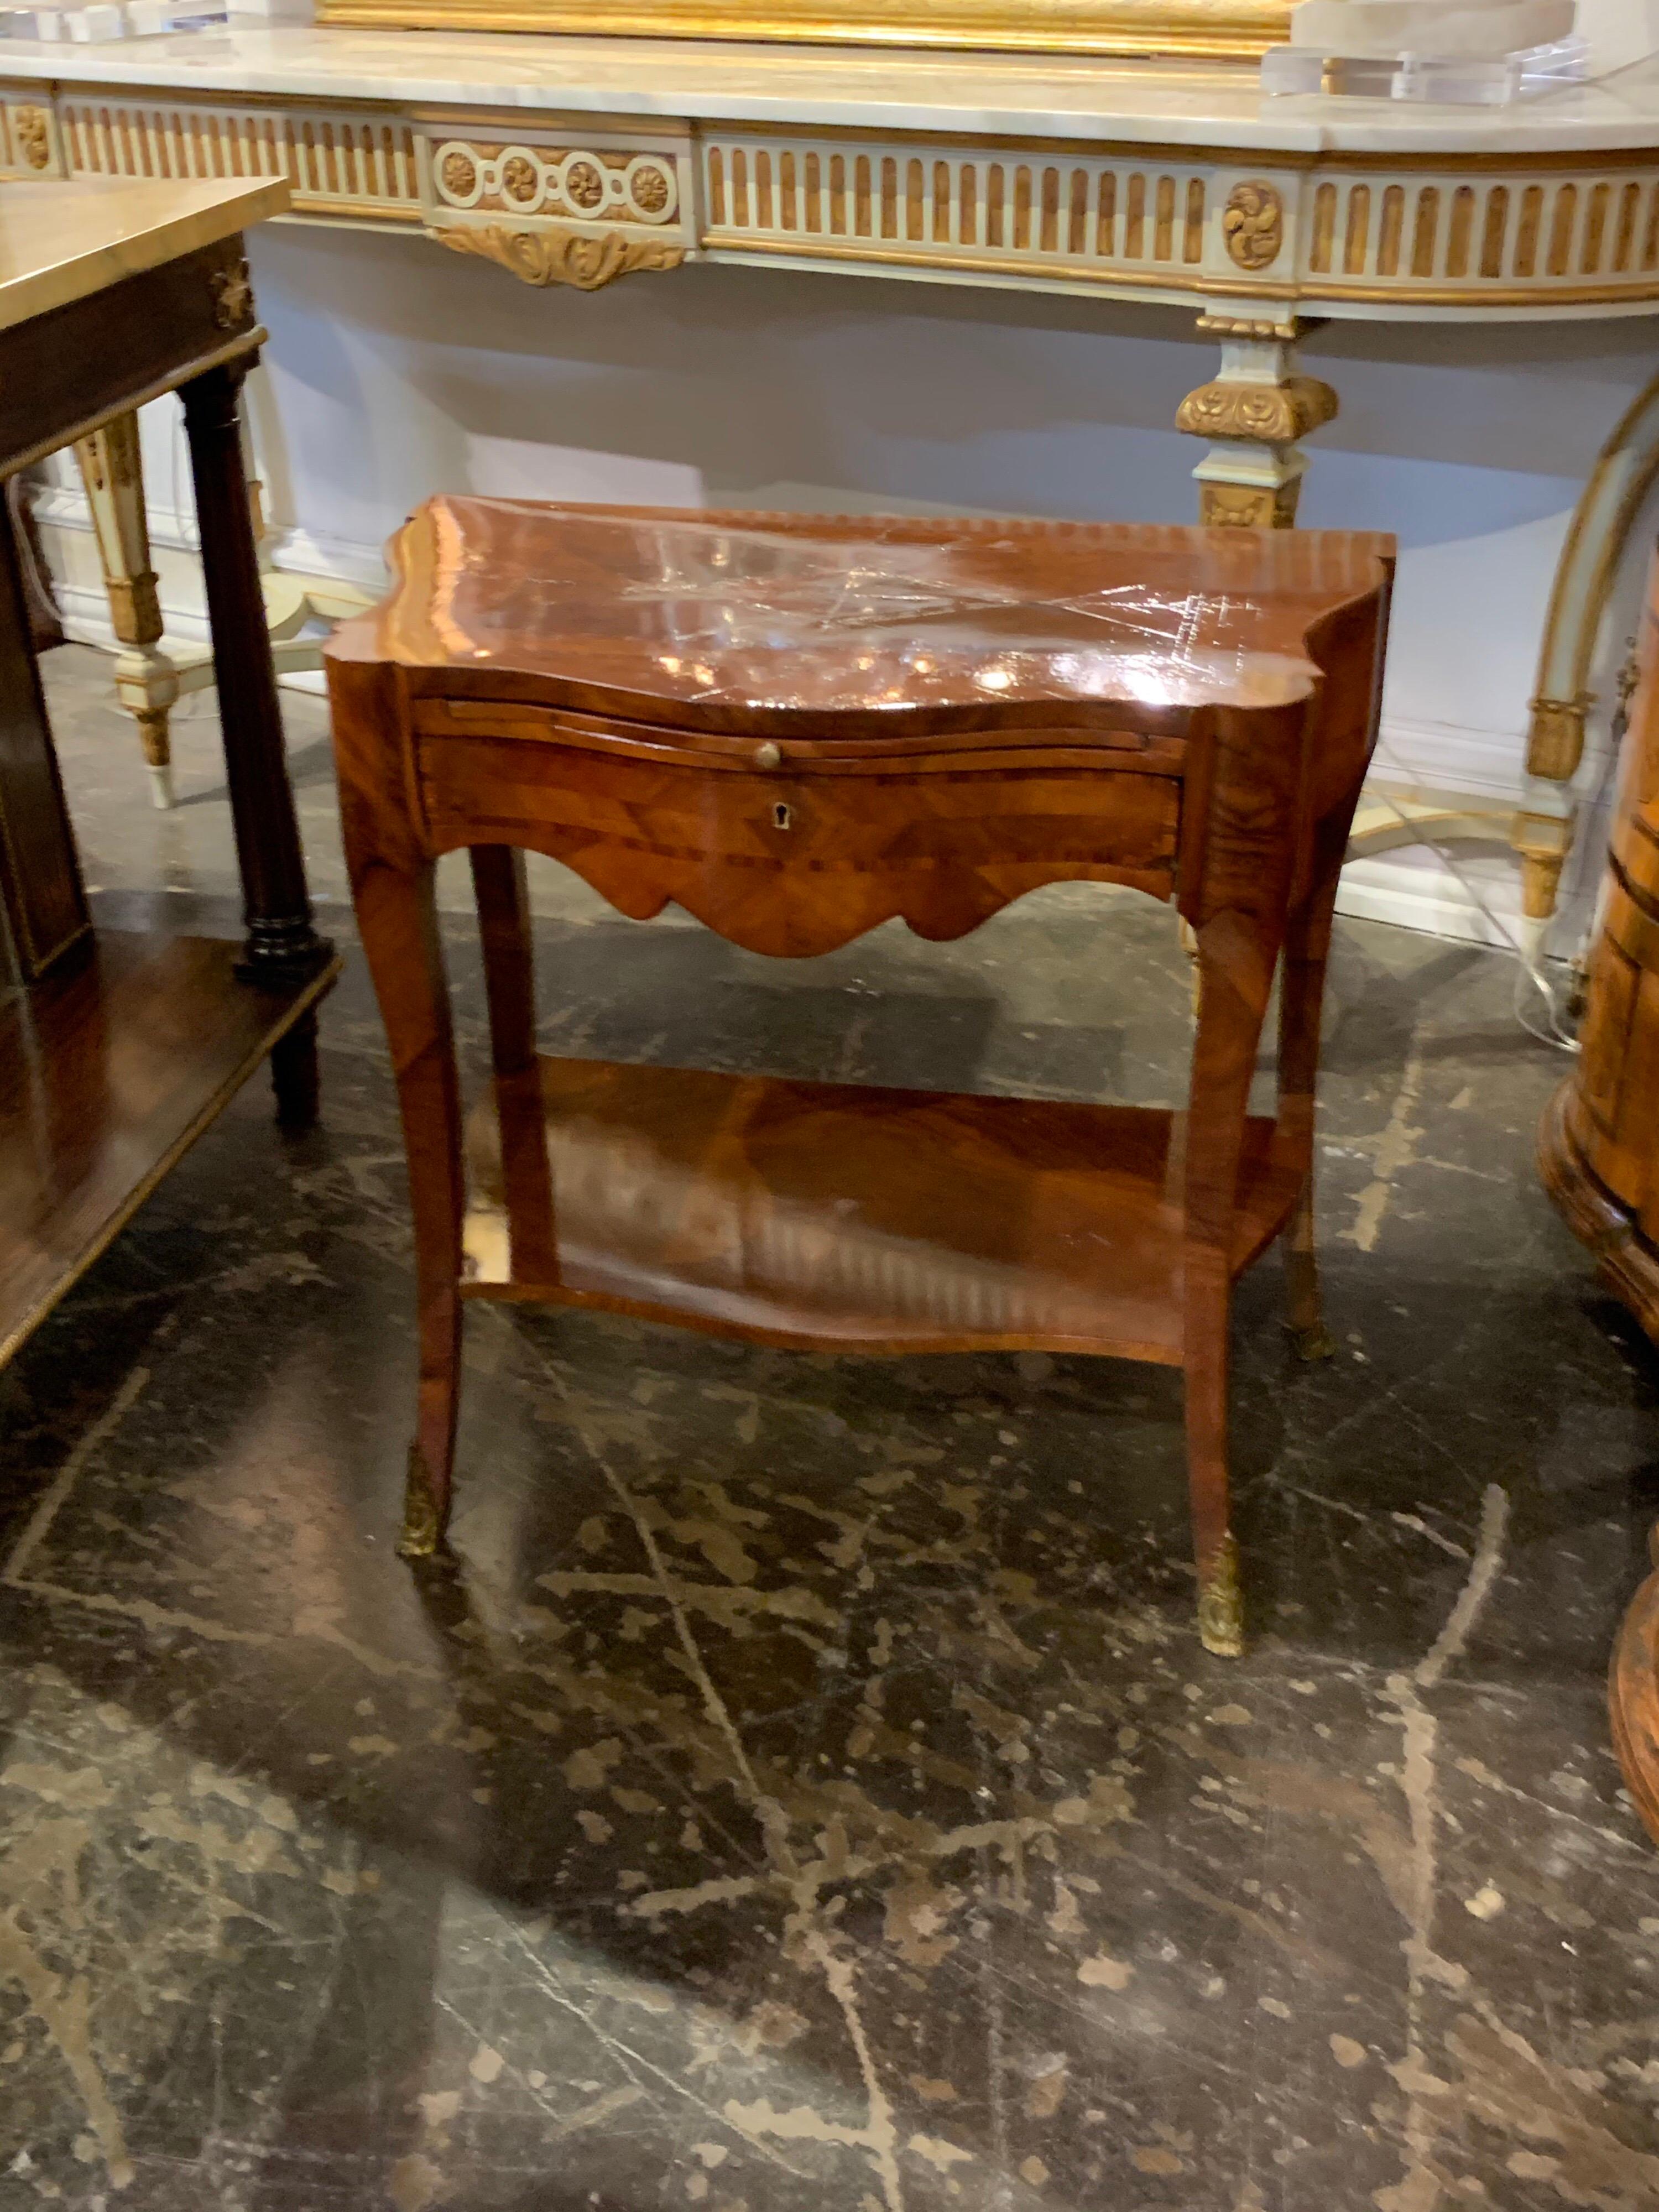 Lovely 19th century burl walnut one drawer side table. The table has one drawer and desk top that pulls out. Also has pretty inlaid details and a very nice finish!